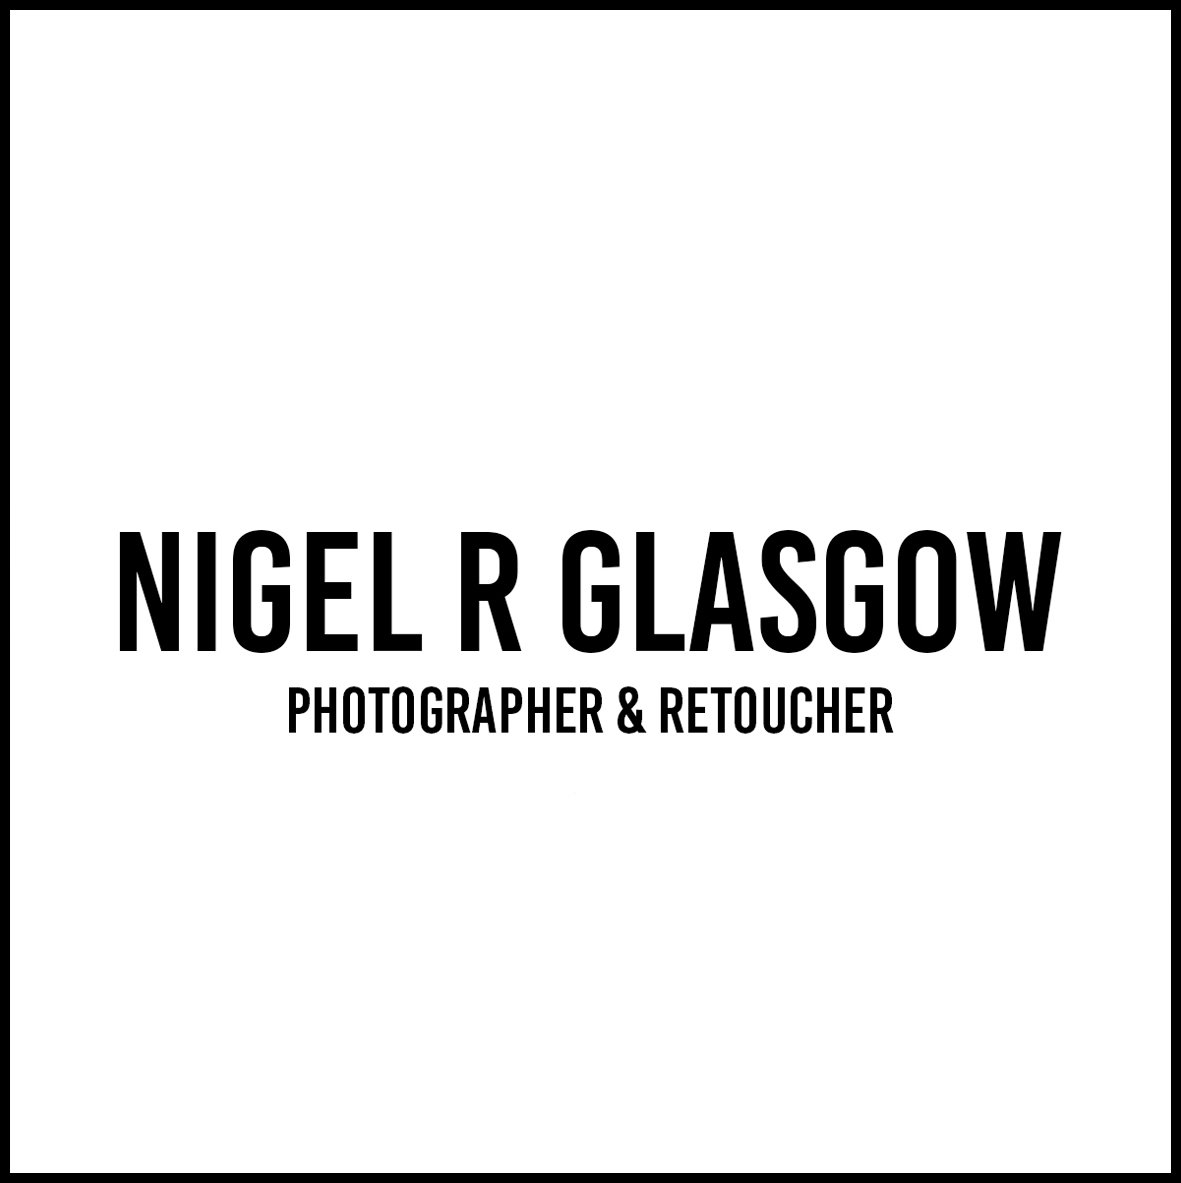 Nigel R Glasgow | London / Chippenham based Photographer &amp; Retoucher specialising in Portraits, Products &amp; Events